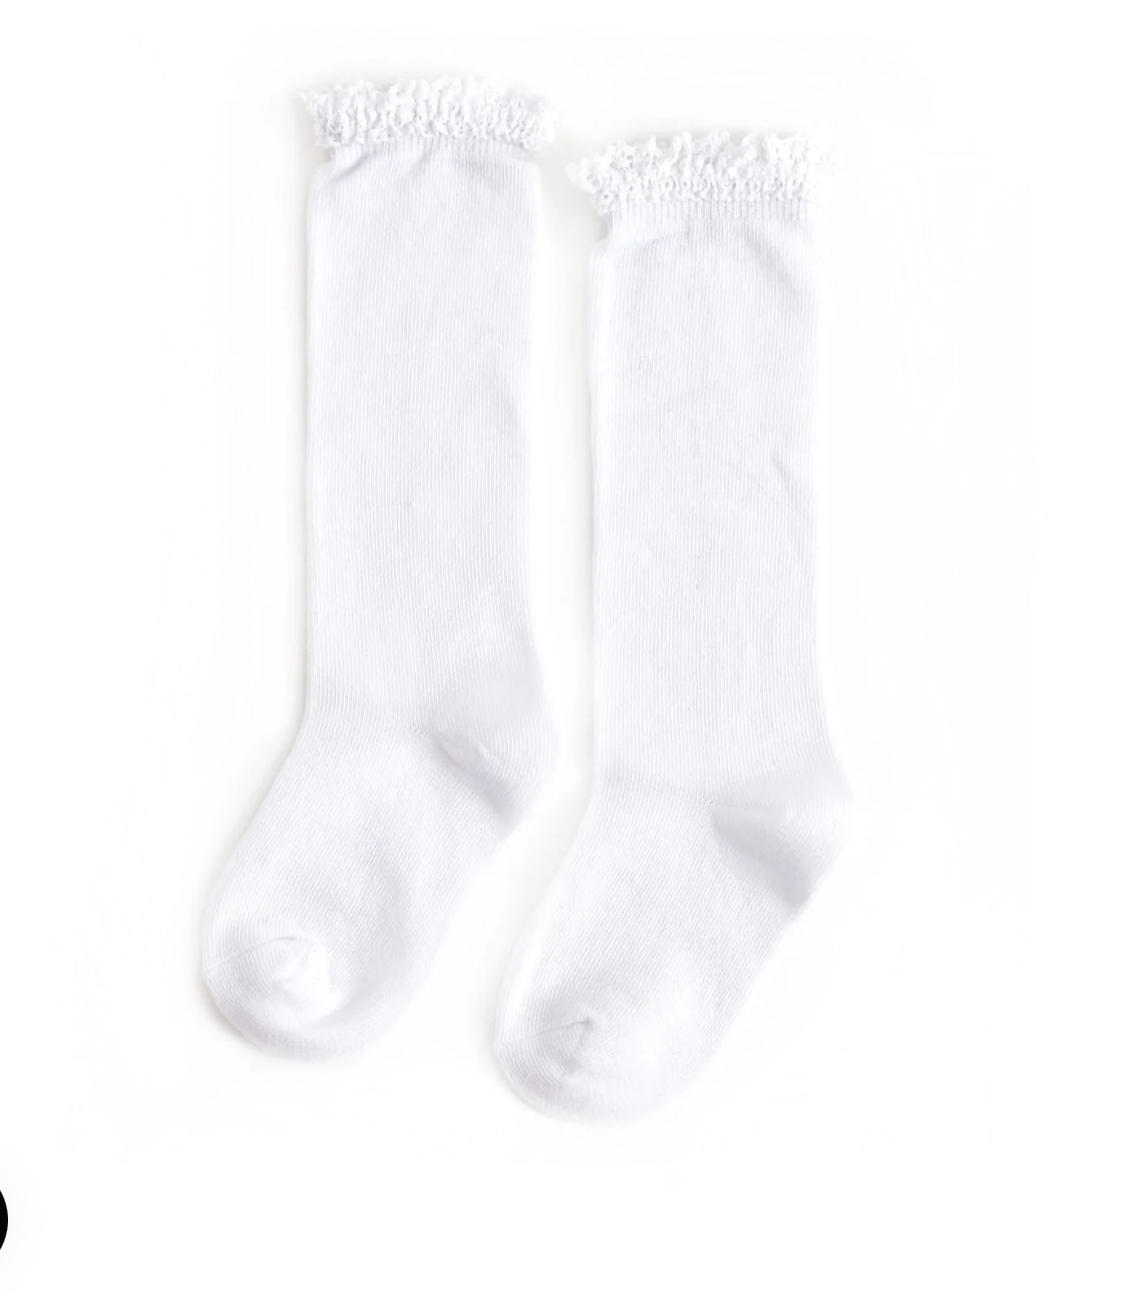 Little Stocking Co. Lace Top Knee High Socks- White